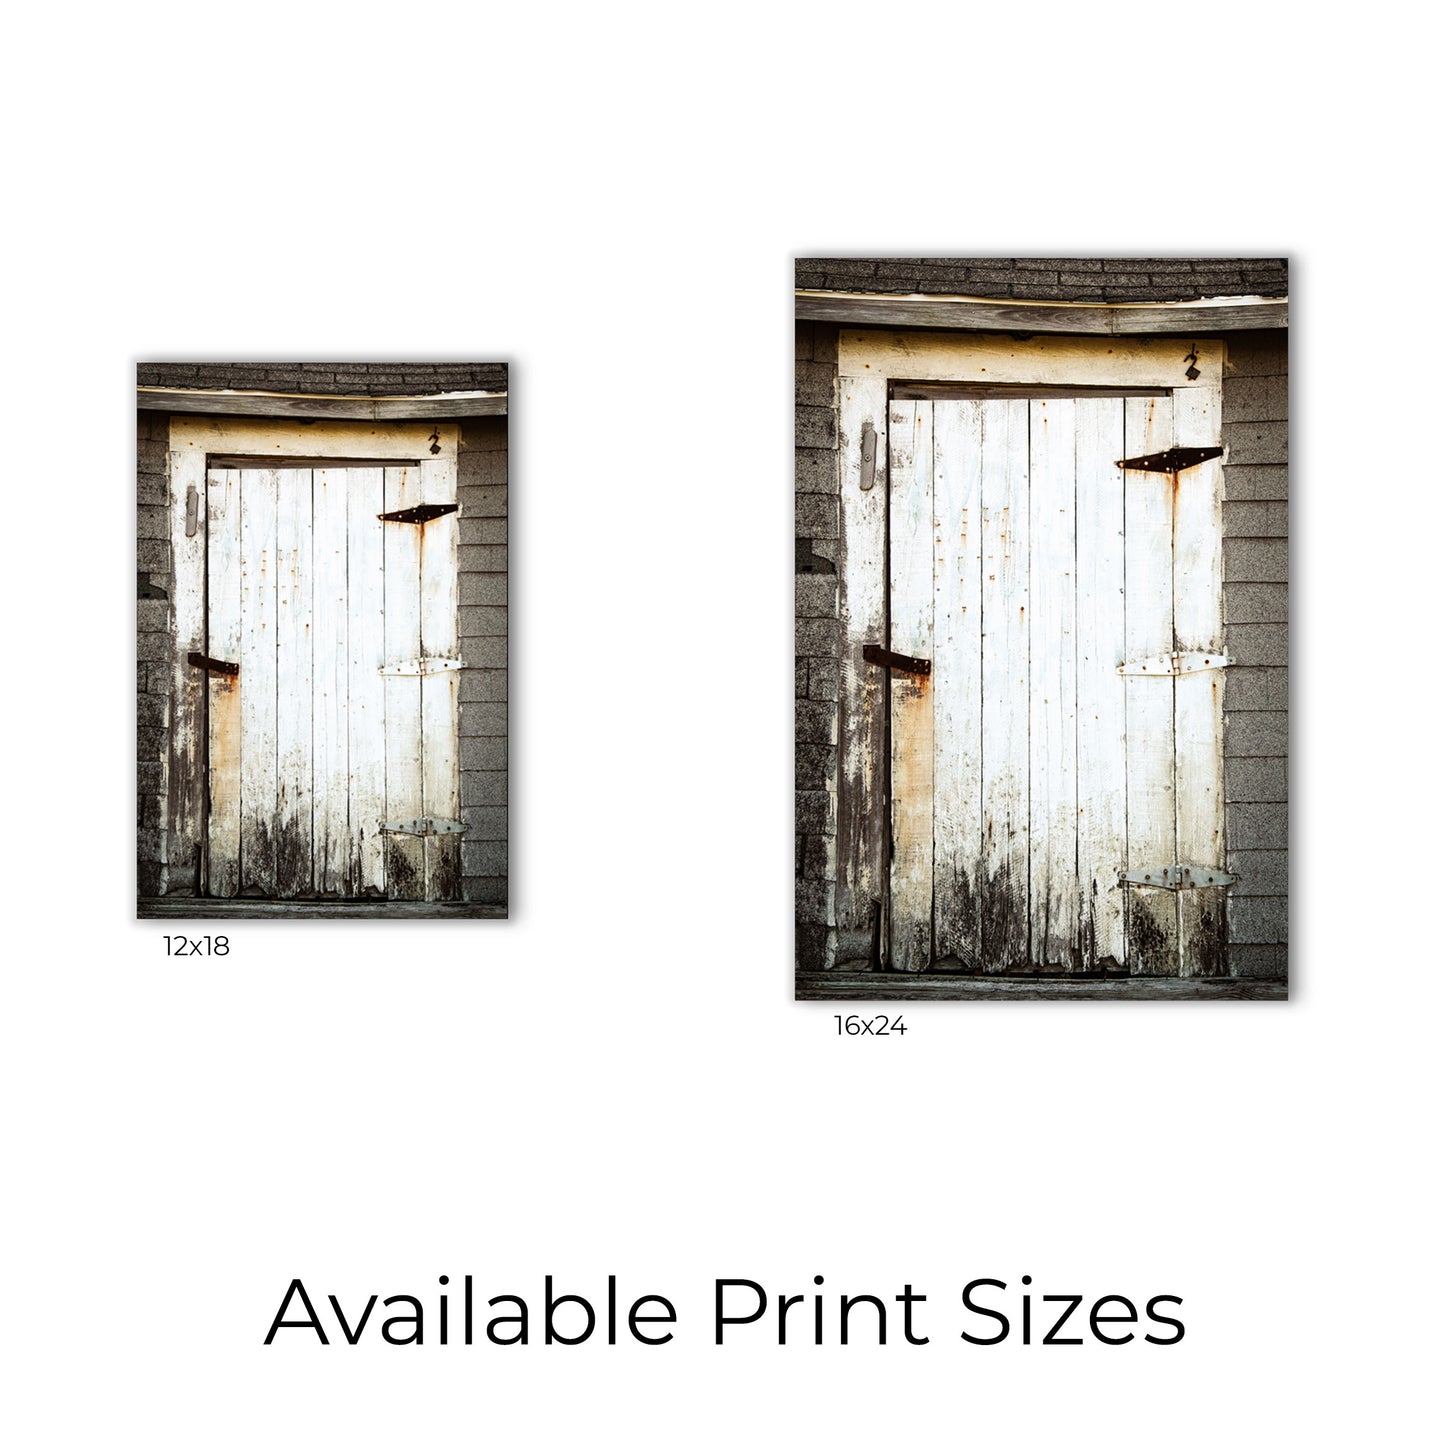 Visual representation of wall art print sizes available: 12x18 and 16x24.